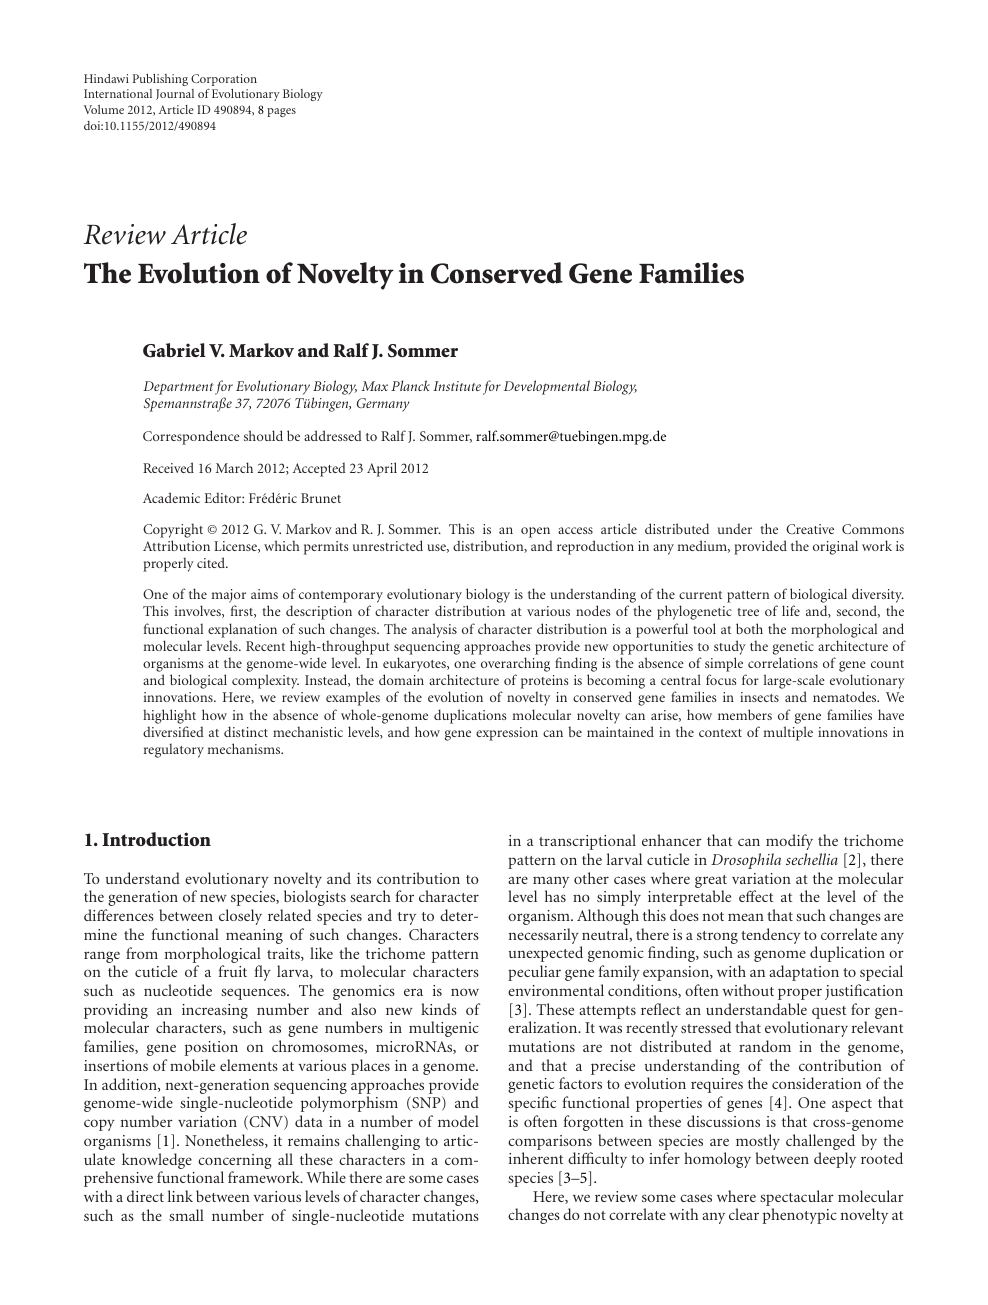 The Evolution Of Novelty In Conserved Gene Families Topic Of Research Paper In Biological Sciences Download Scholarly Article Pdf And Read For Free On Cyberleninka Open Science Hub